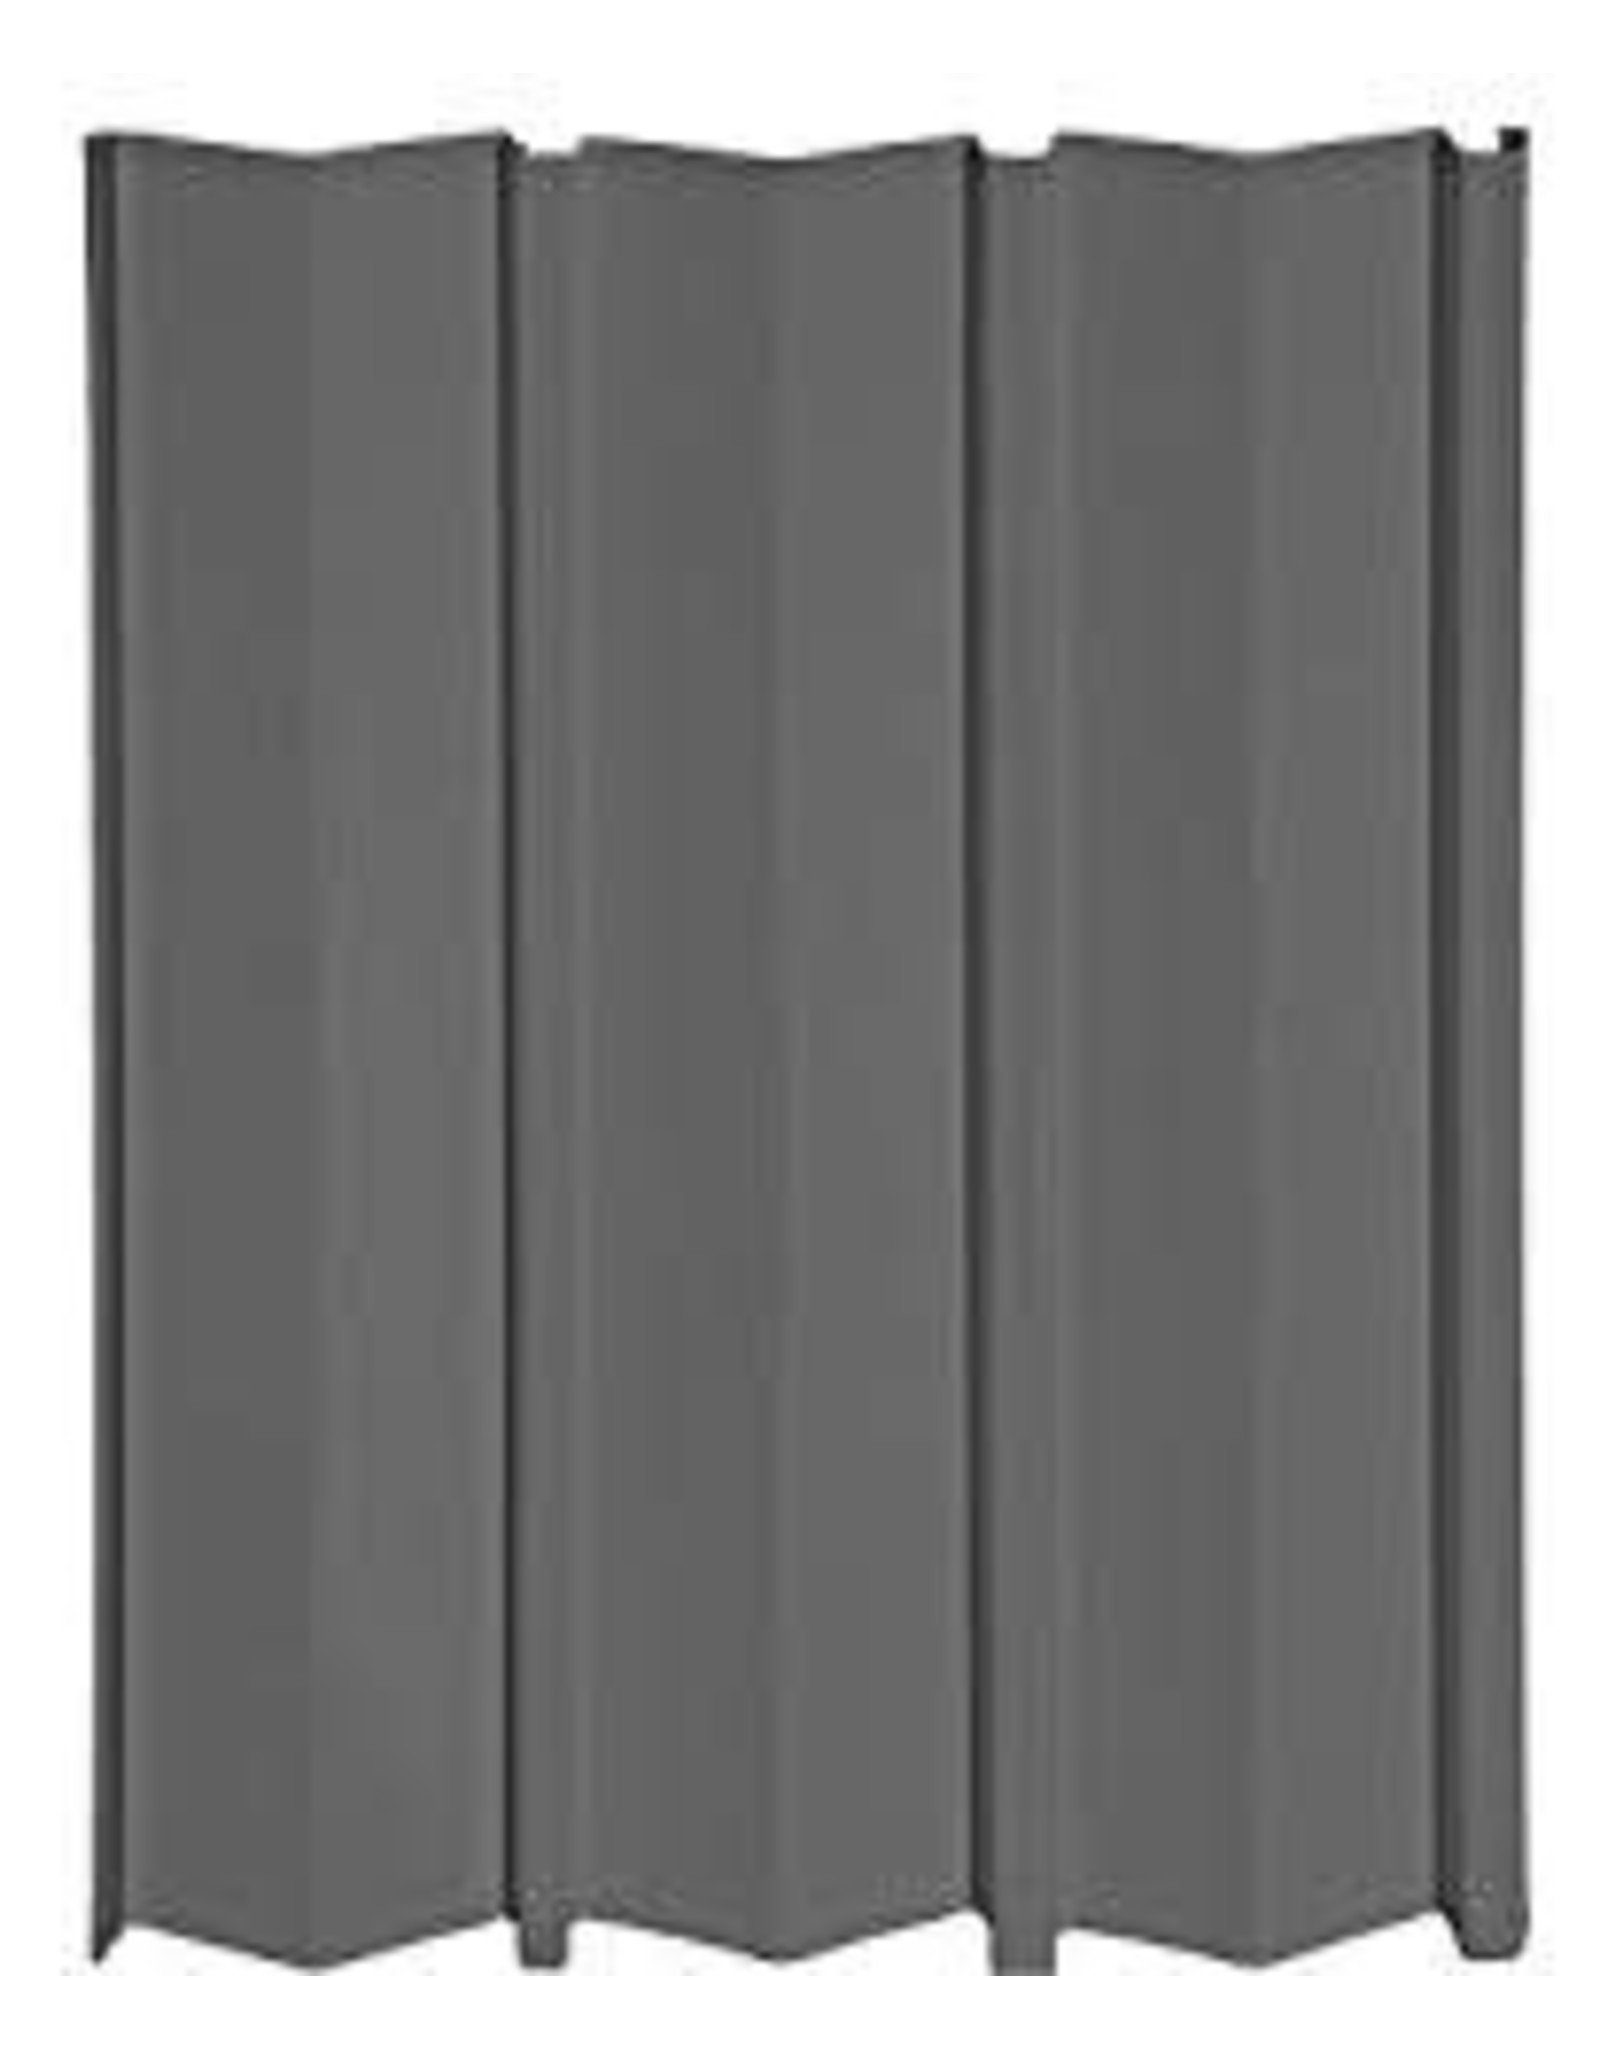 STYLCREST CHARCOAL PREM PLUS SKIRTING PANEL 16" X 140